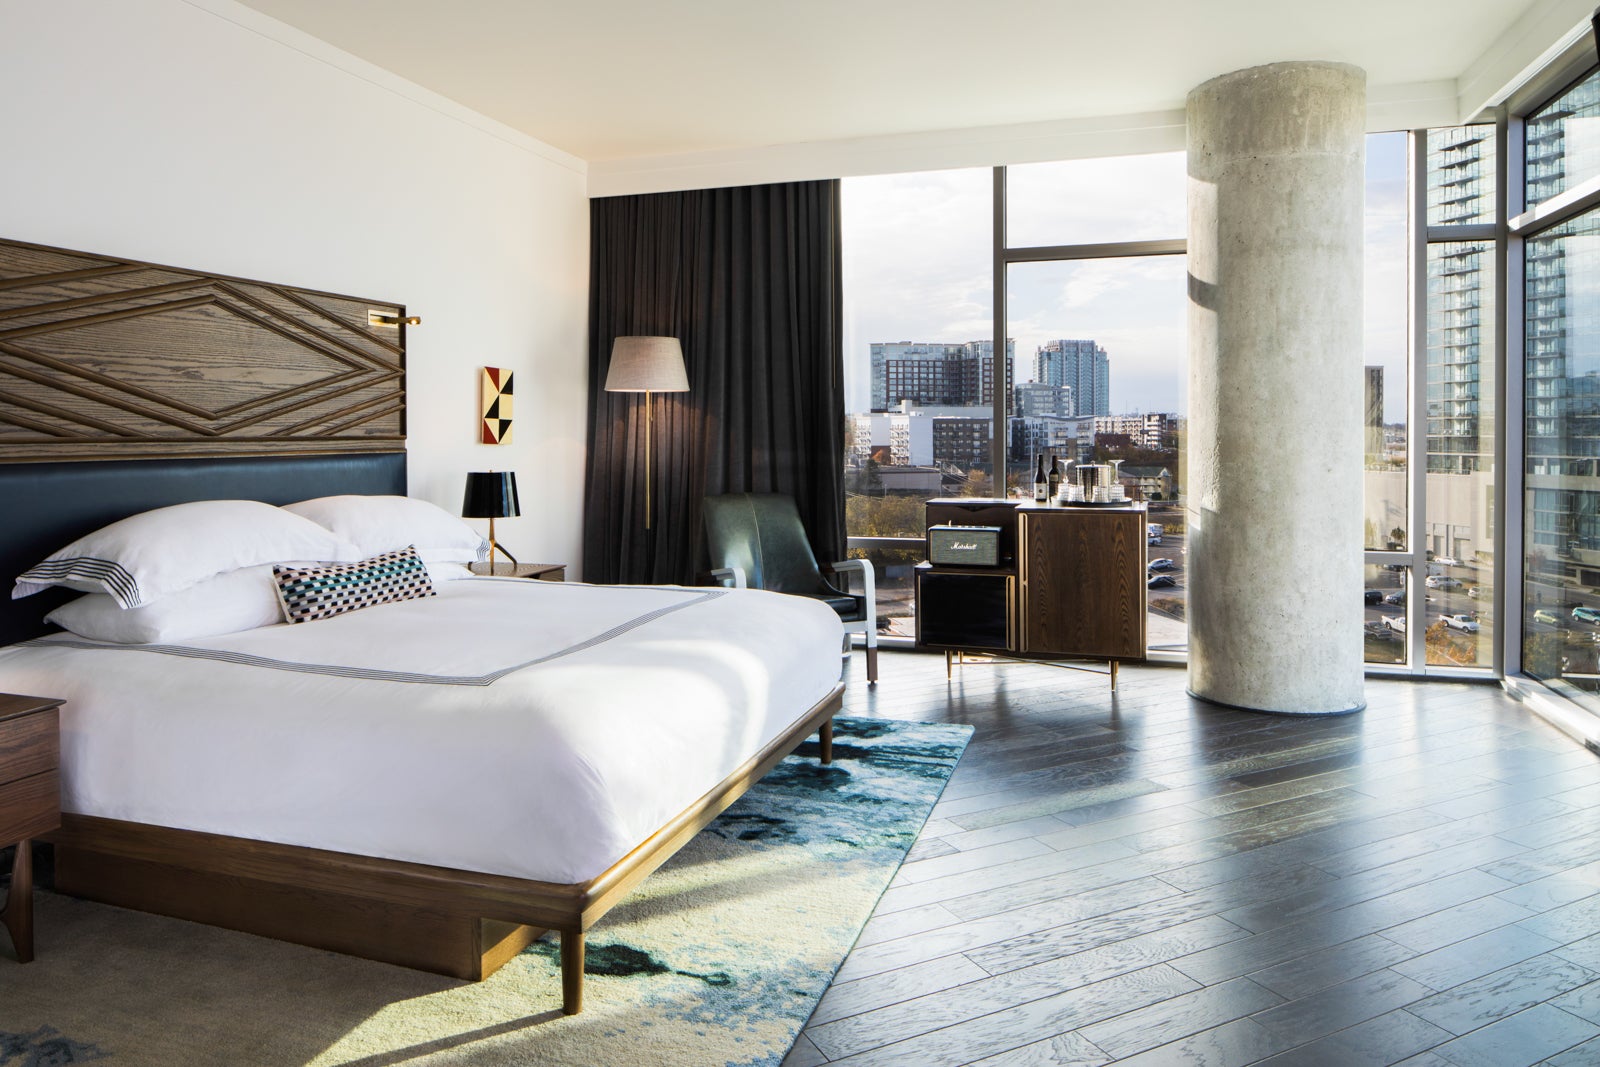 The best hotels to book in Nashville for the full Music City experience